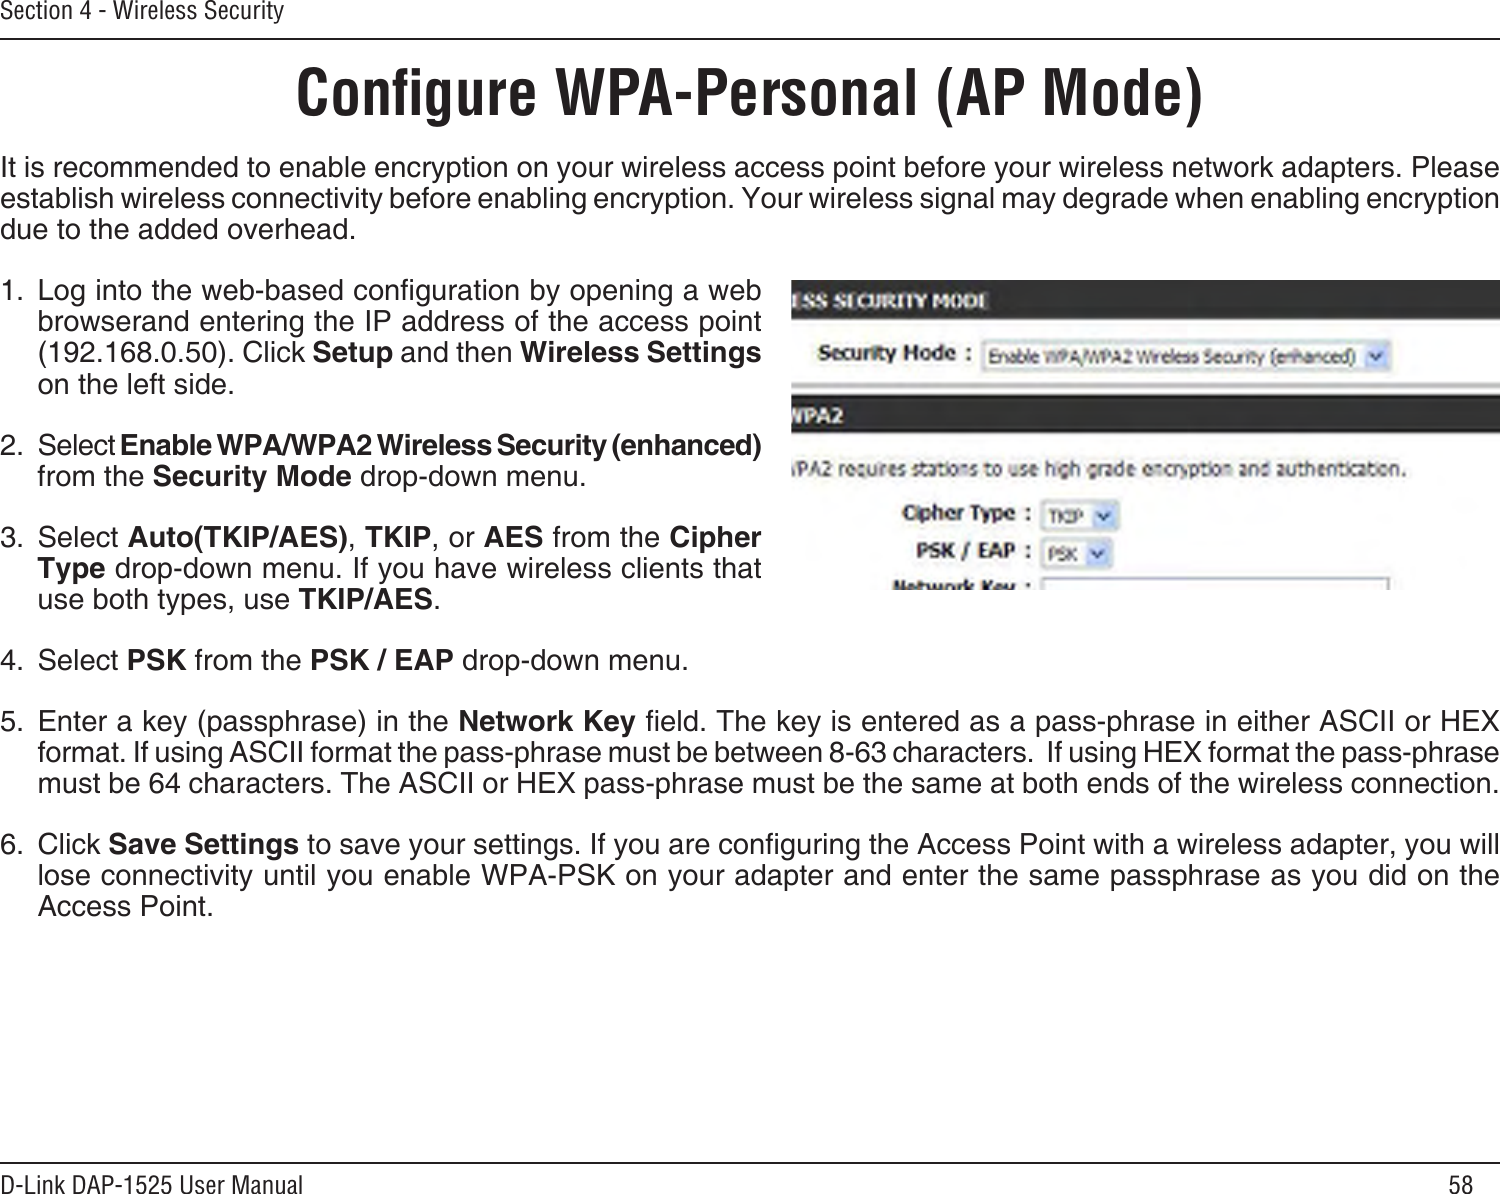 58D-Link DAP-1525 User ManualSection 4 - Wireless SecurityConﬁgure WPA-Personal (AP Mode)It is recommended to enable encryption on your wireless access point before your wireless network adapters. Please establish wireless connectivity before enabling encryption. Your wireless signal may degrade when enabling encryption due to the added overhead.1.  Log into the web-based conguration by opening a web  browserand entering the IP address of the access point (192.168.0.50). Click Setup and then Wireless Settings on the left side.2.  Select Enable WPA/WPA2 Wireless Security (enhanced) from the Security Mode drop-down menu.3.  Select Auto(TKIP/AES), TKIP, or AES from the Cipher Type drop-down menu. If you have wireless clients that use both types, use TKIP/AES.4.  Select PSK from the PSK / EAP drop-down menu.5.  Enter a key (passphrase) in the Network Key eld. The key is entered as a pass-phrase in either ASCII or HEX format. If using ASCII format the pass-phrase must be between 8-63 characters.  If using HEX format the pass-phrase must be 64 characters. The ASCII or HEX pass-phrase must be the same at both ends of the wireless connection.6.  Click Save Settings to save your settings. If you are conguring the Access Point with a wireless adapter, you will lose connectivity until you enable WPA-PSK on your adapter and enter the same passphrase as you did on the Access Point.